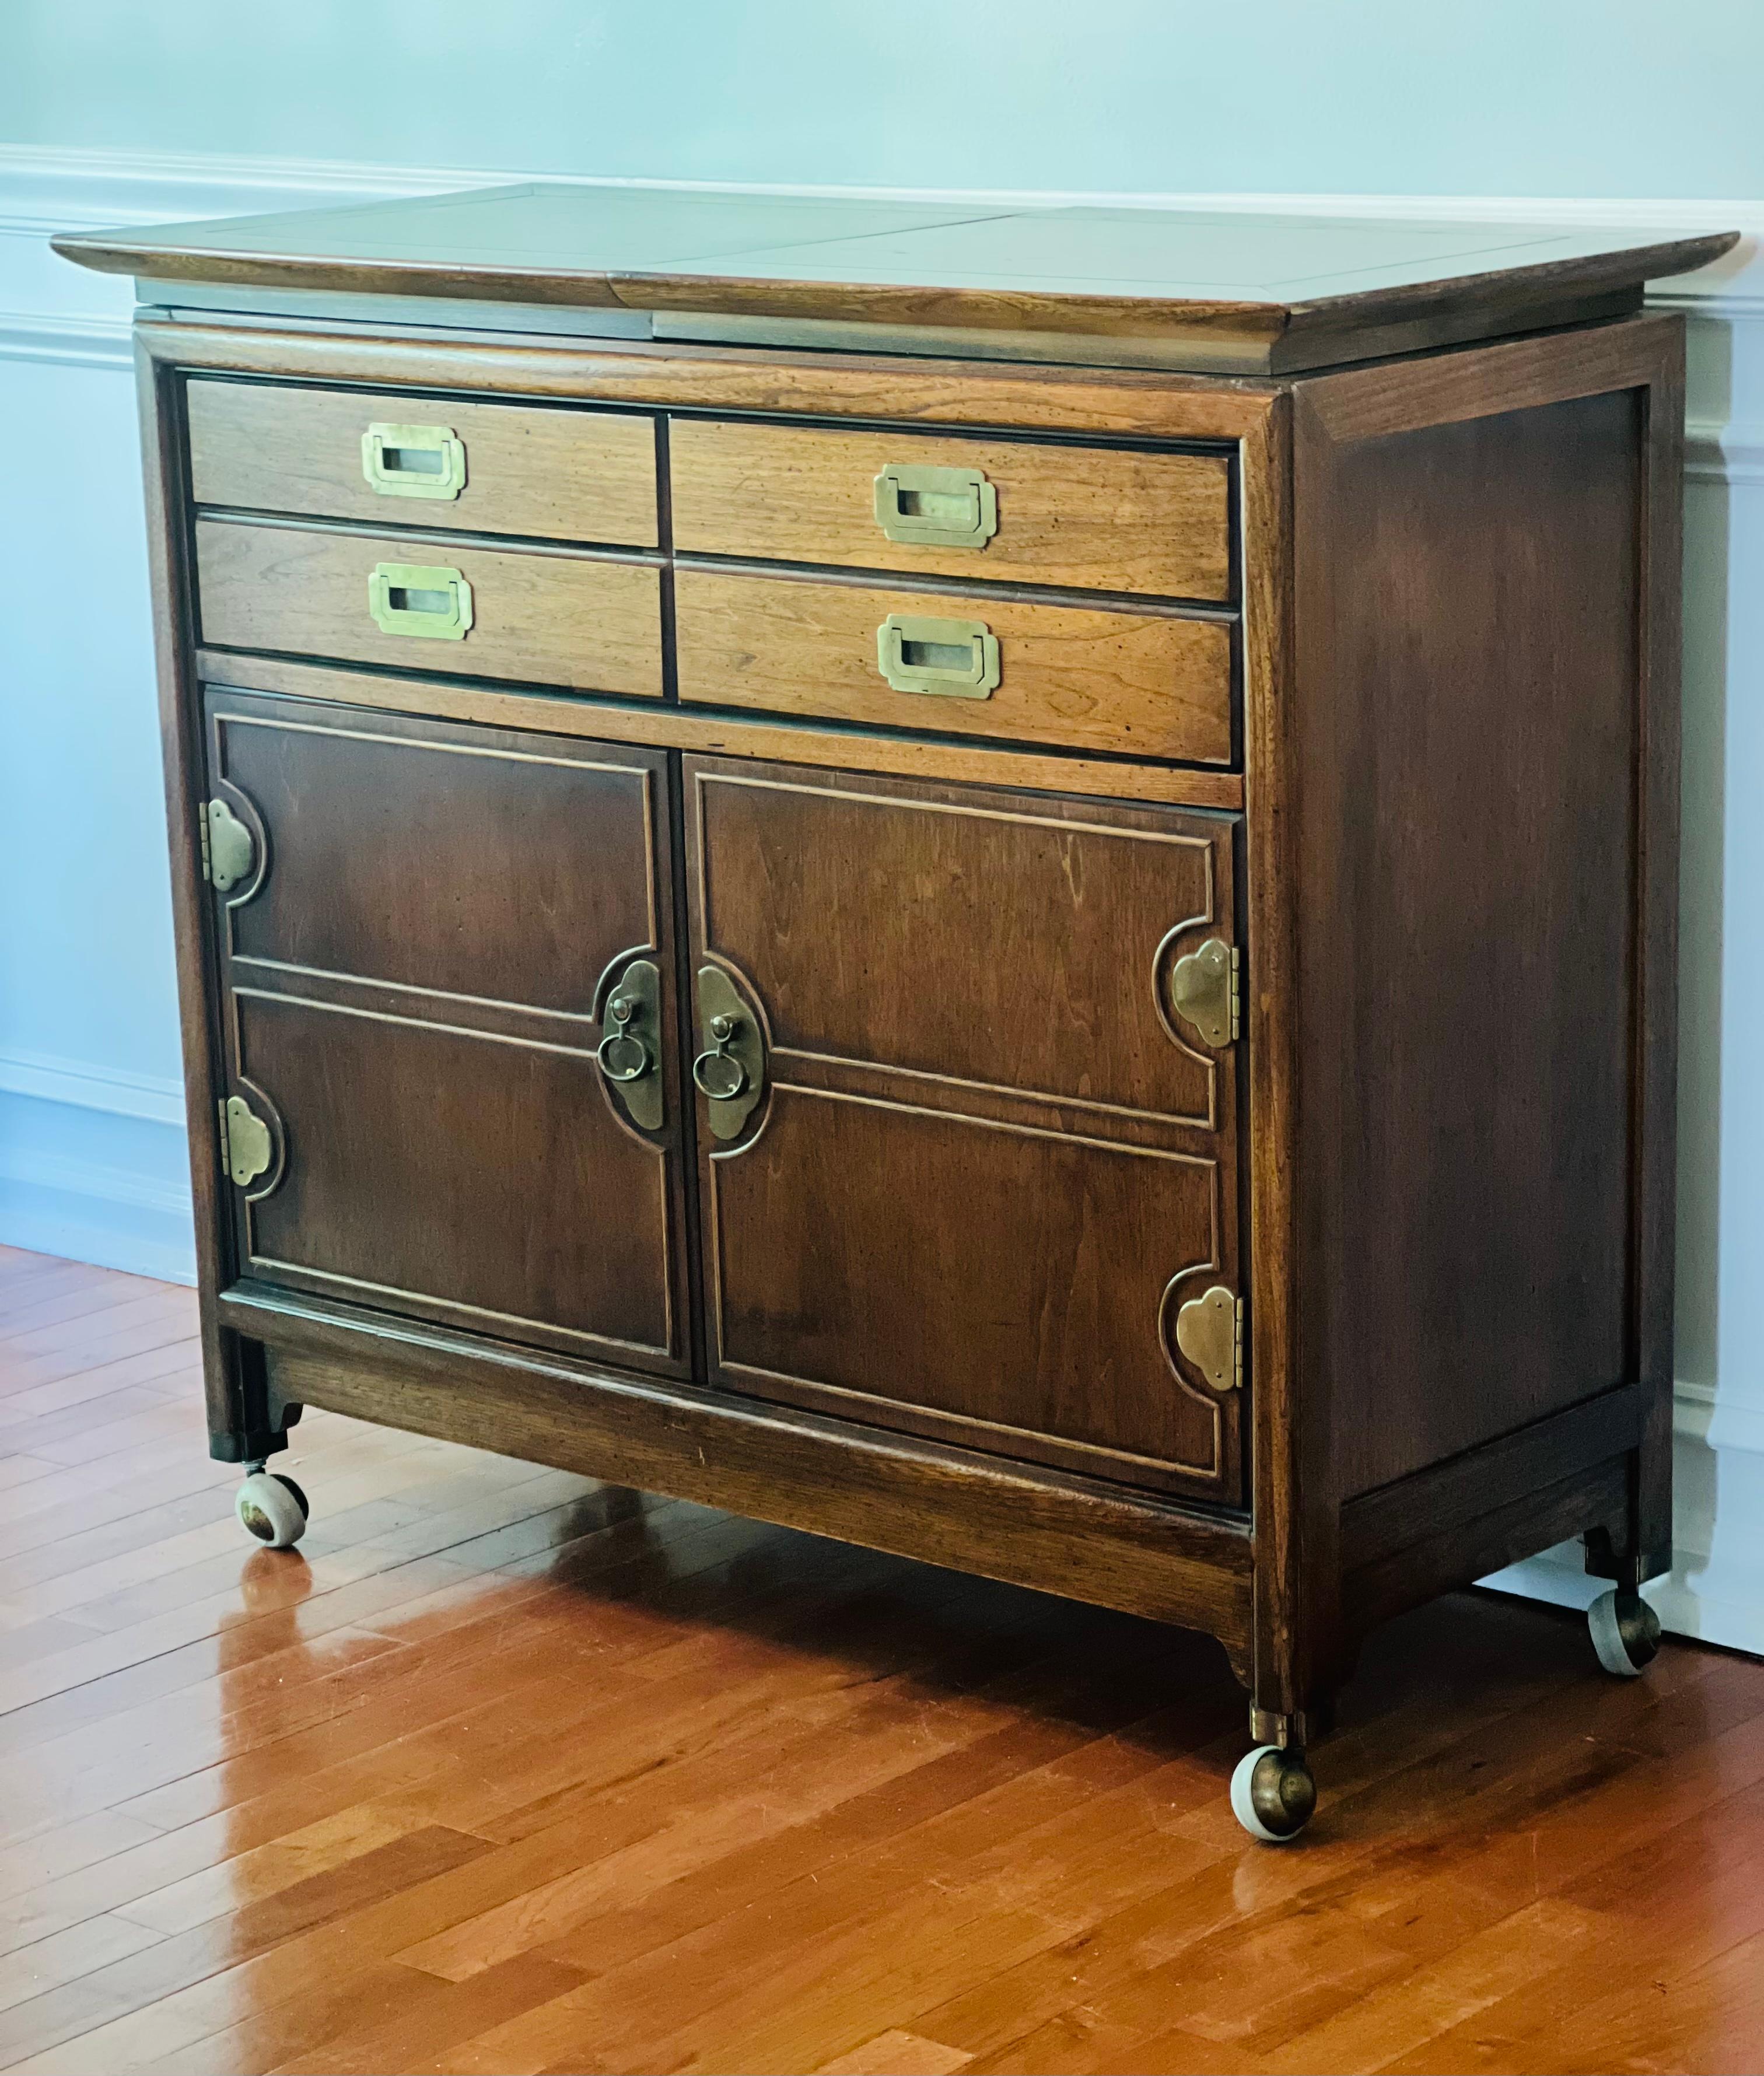 Beautiful and efficiently designed fruitwood server/sideboard on caster wheels. Lots of storage and wheels maneuver with ease. Features one divided drawer with double hardware and a lower cabinet with two shelves. The top opens up to provide extra